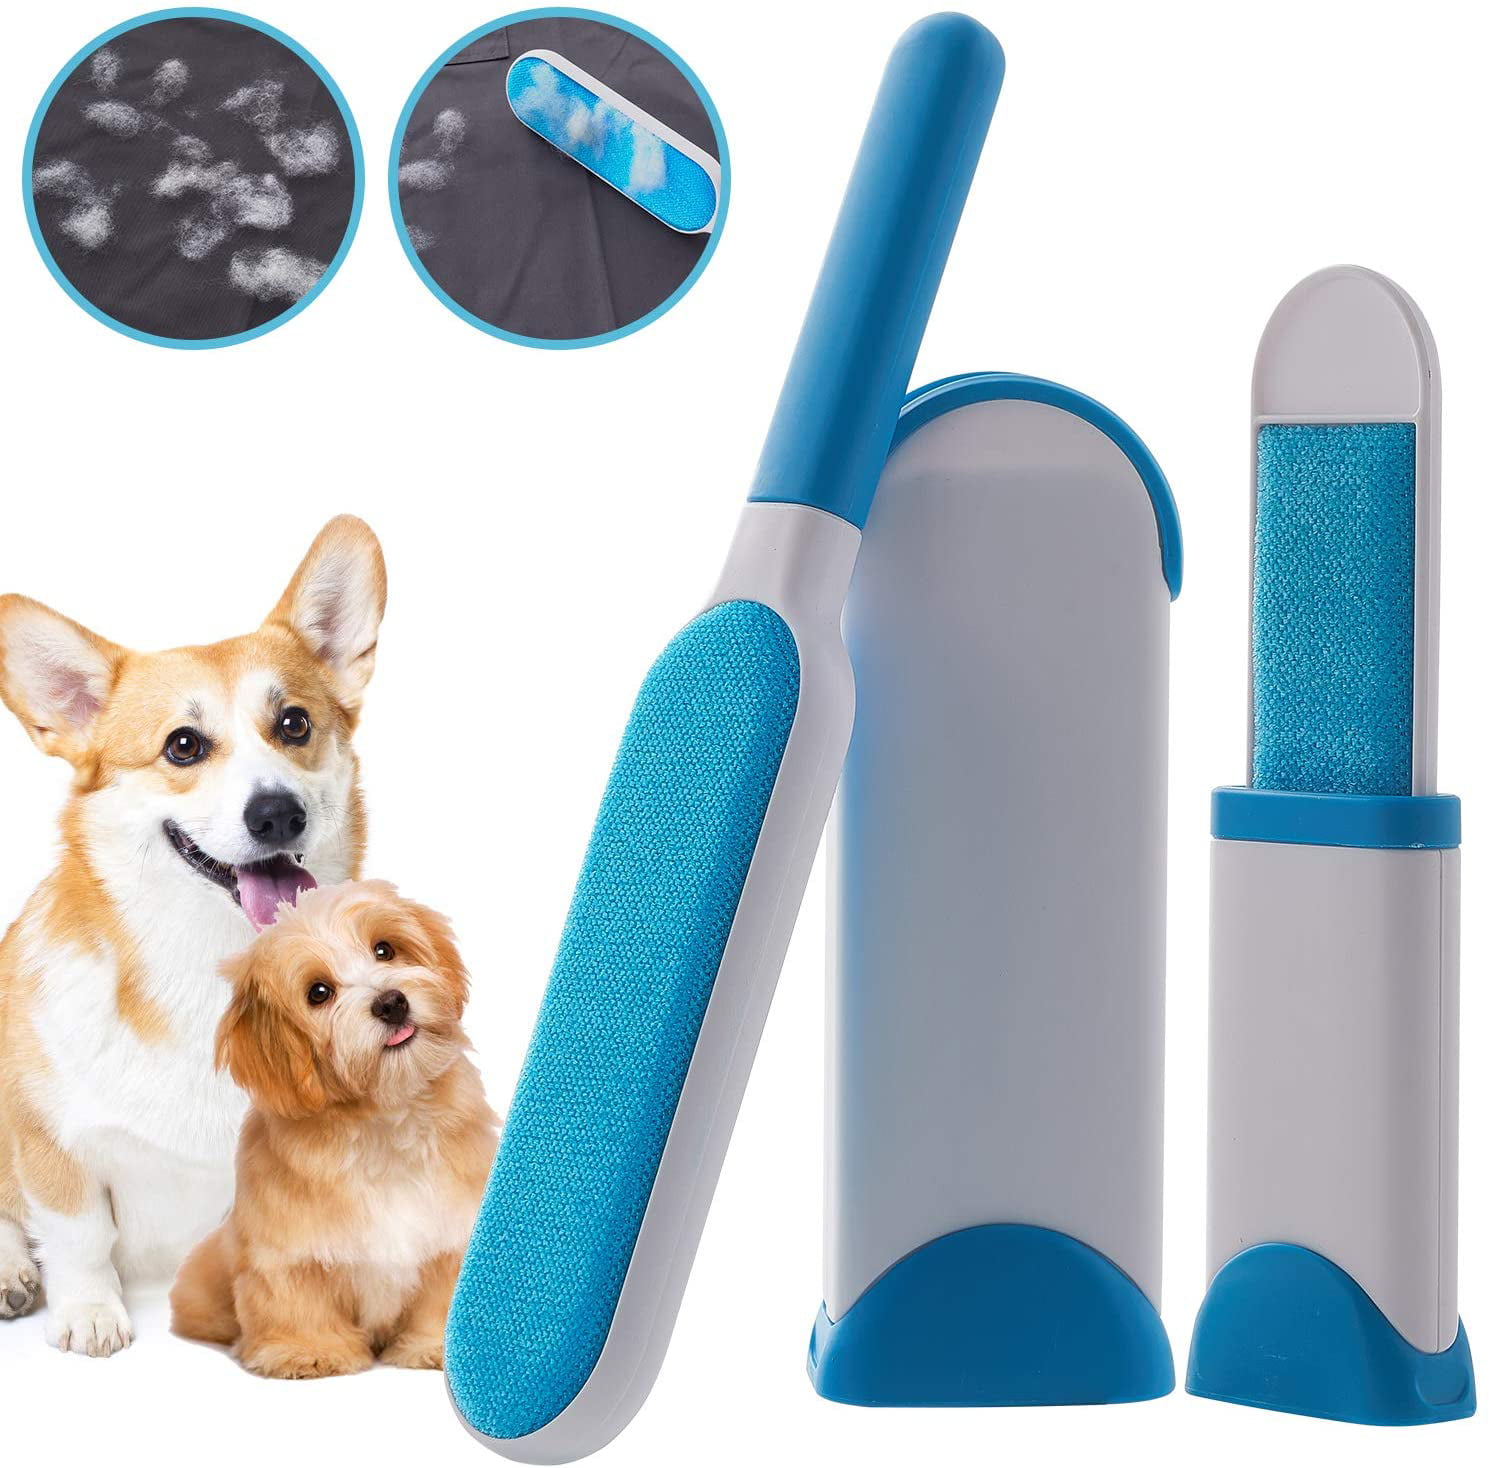 Pet Hair Remover Brush,Lint Brush Dog&Cat Fur Remover Reusable Self-Cleaning Base-Double Sided Animal Hair Removal Tool+Travel Size Brush-for Clothes,Furniture,Couch,Carpet